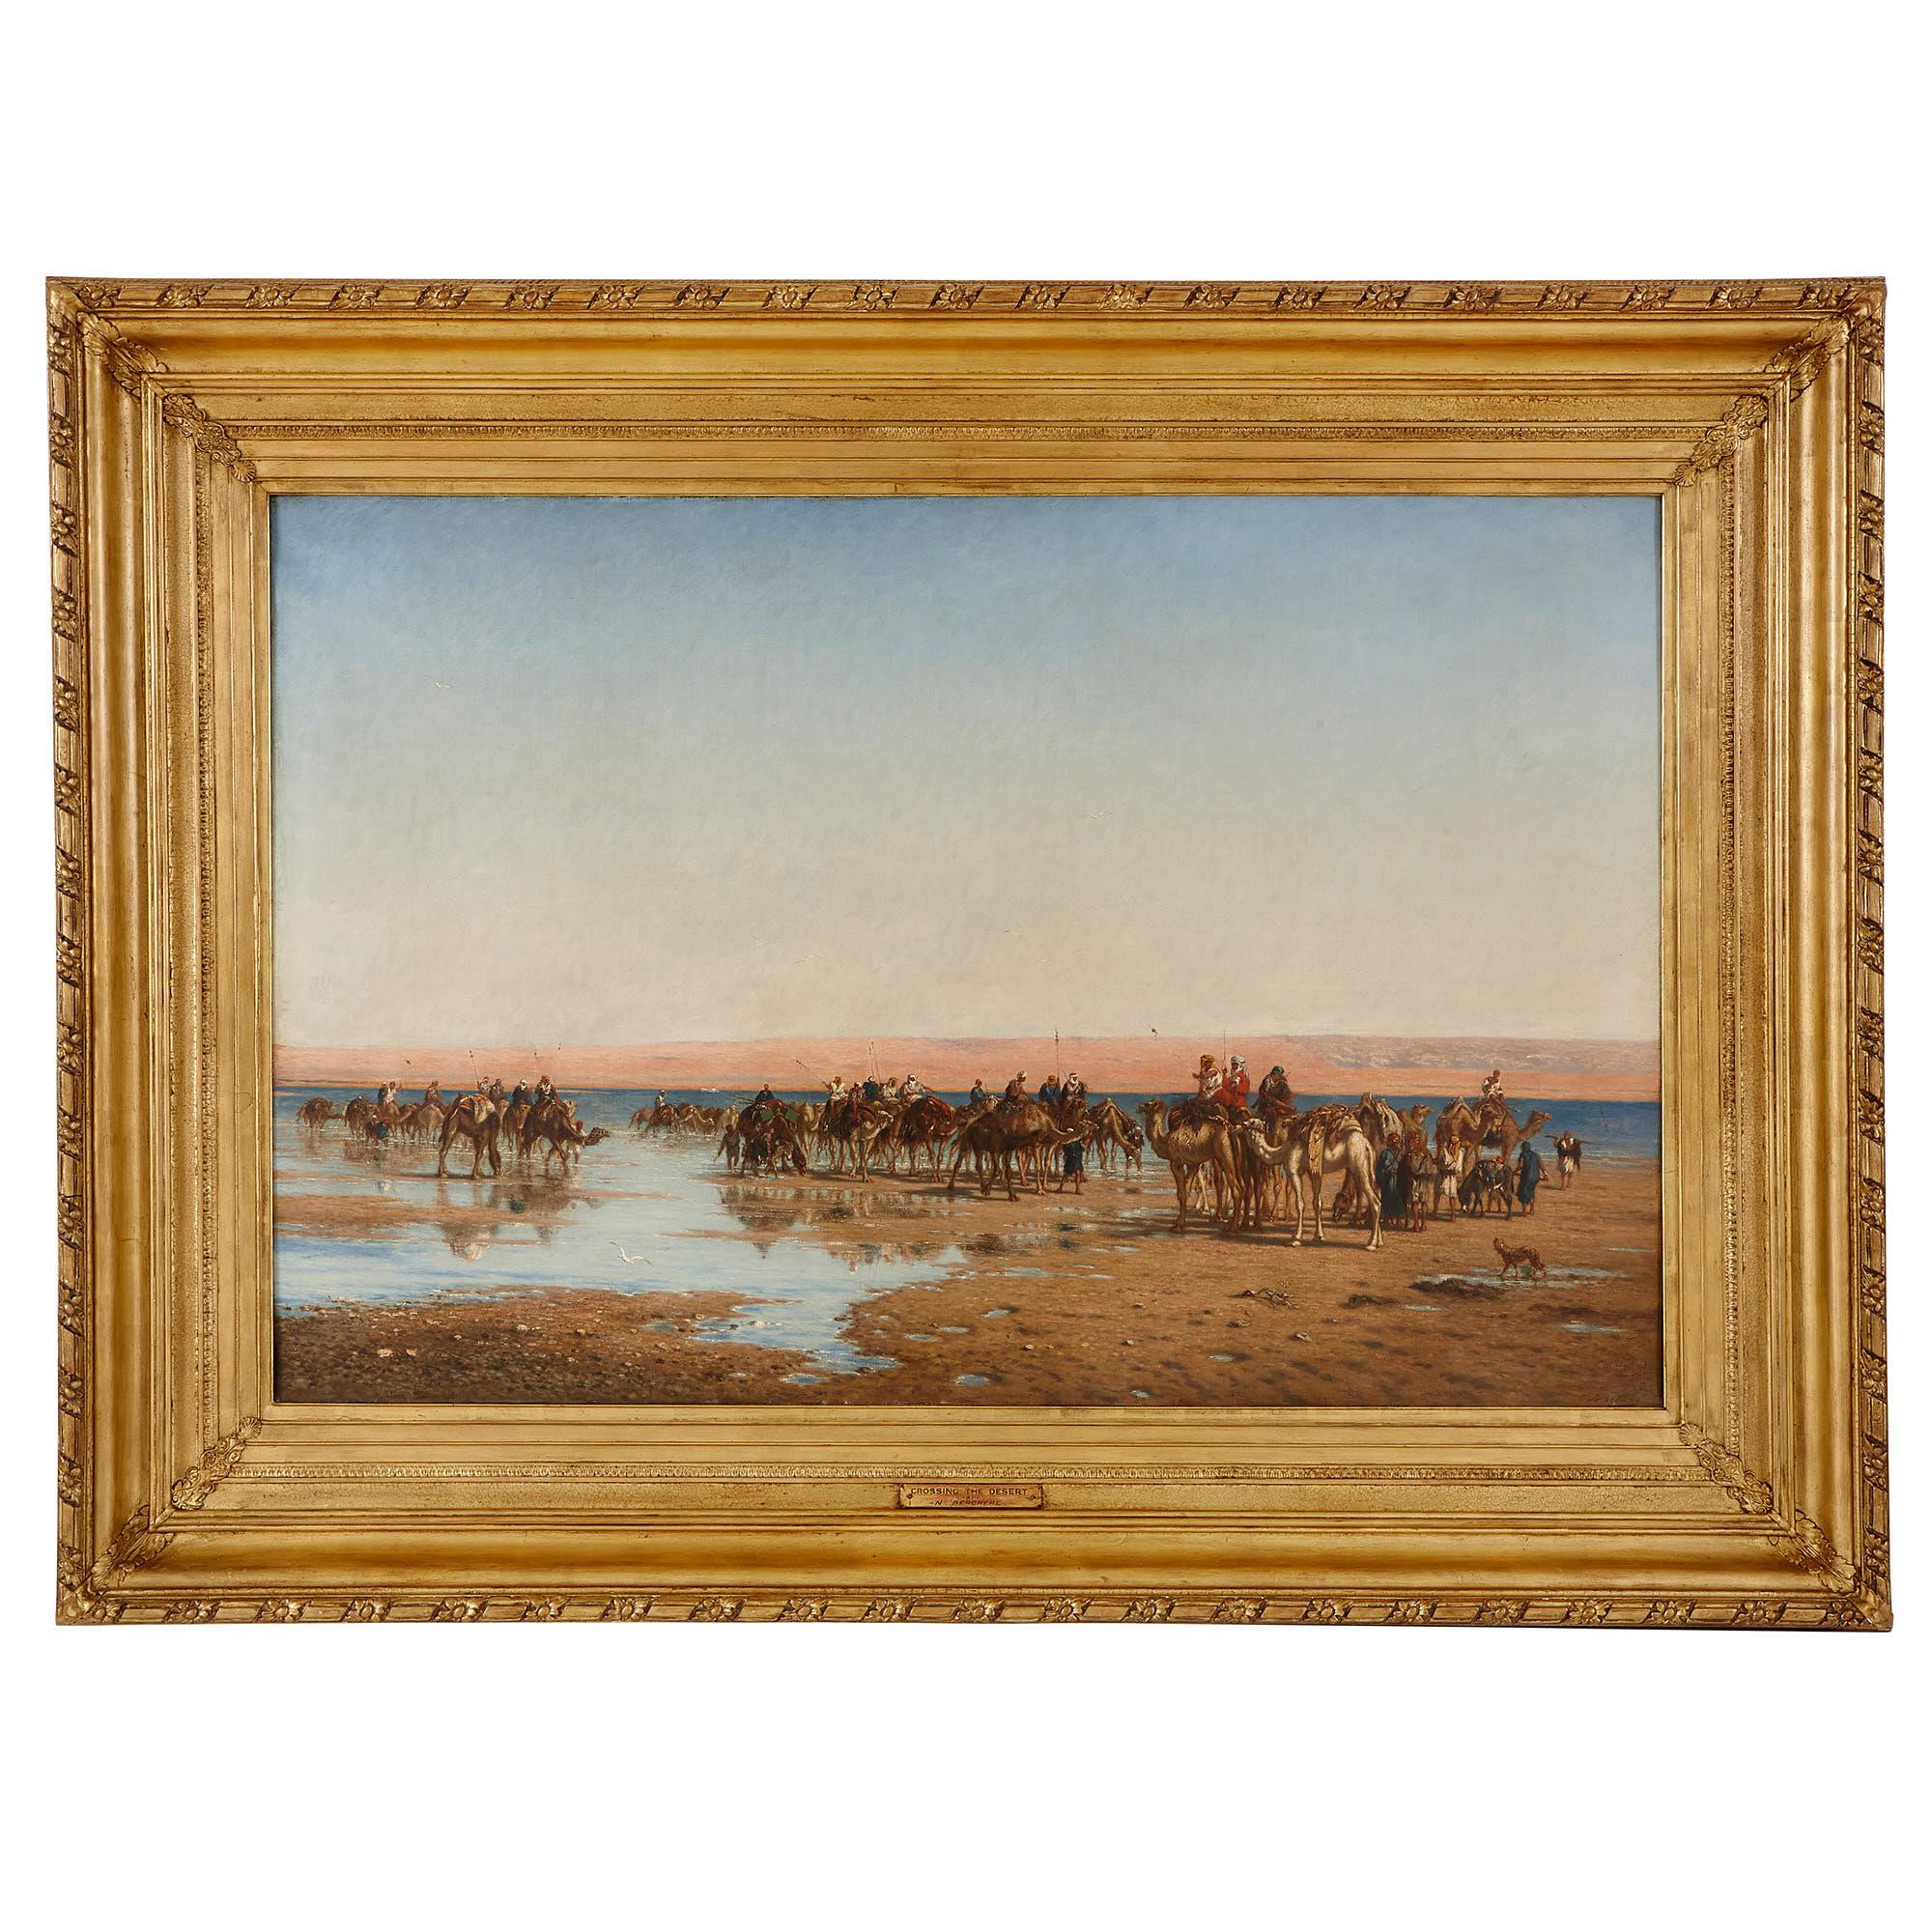 Large Orientalist painting of an Egyptian voyage by Berchère